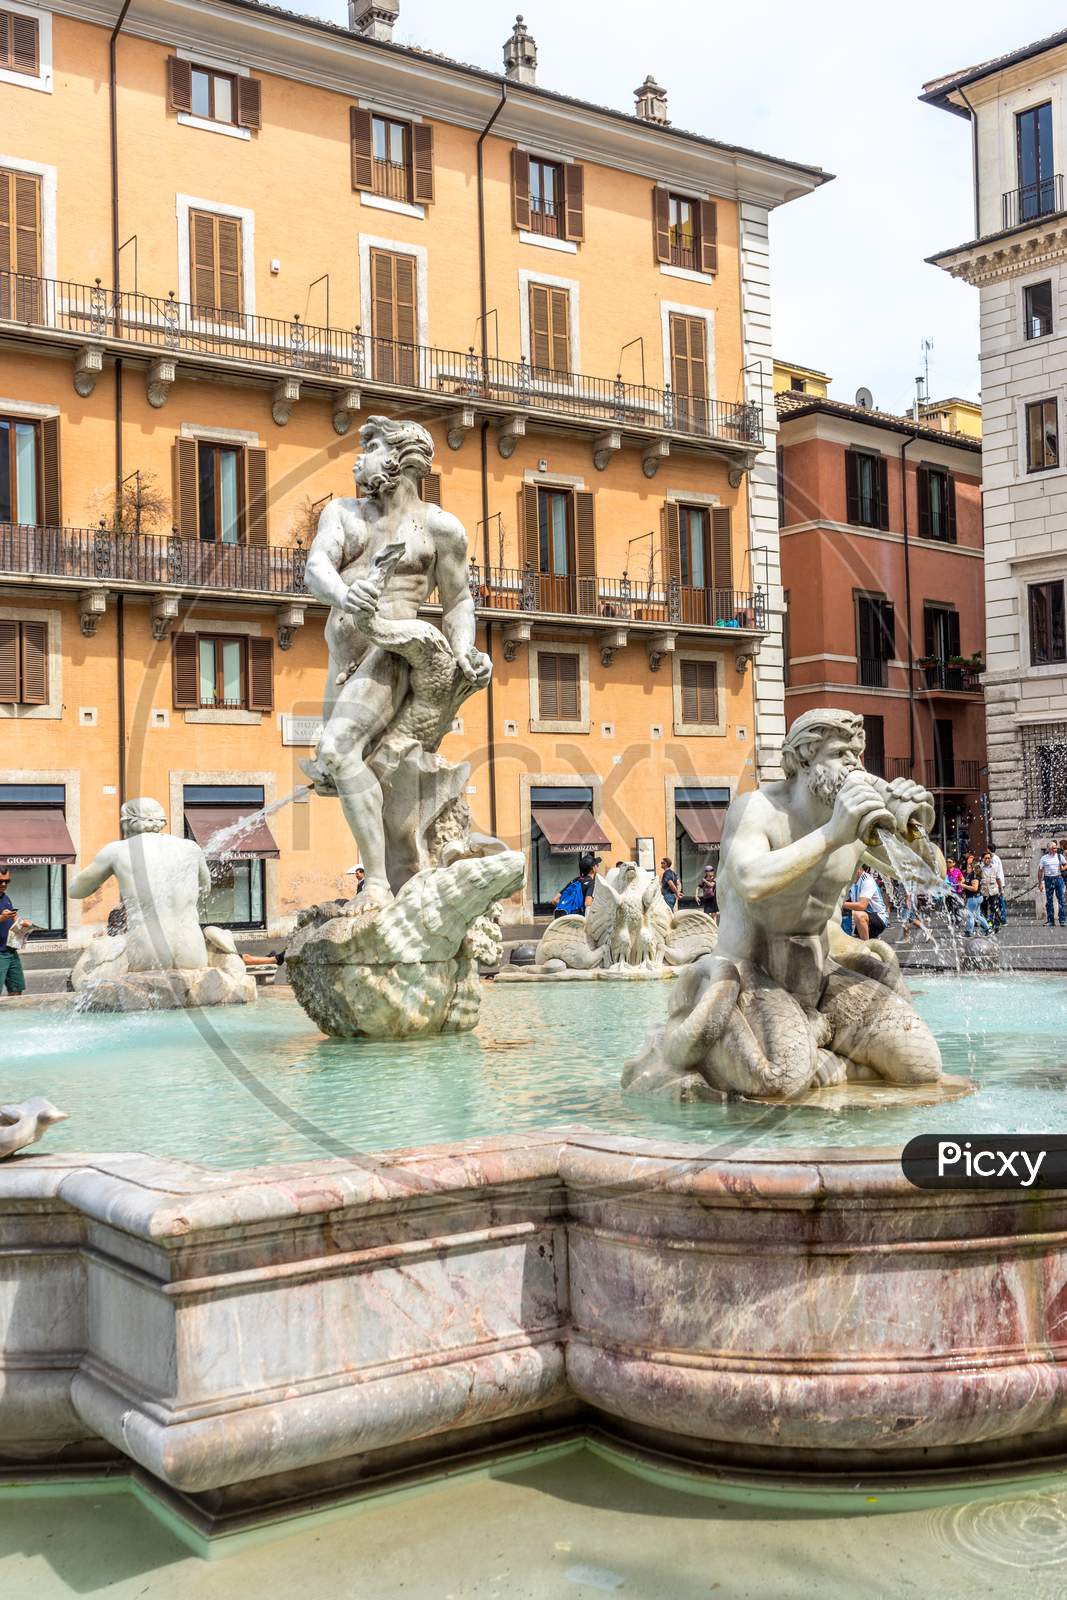 Rome, Italy - 24 June 2018: Fontana Del Moro (Moor Fountain) Is A Fountain Located At The Southern End Of The Piazza Navona In Rome, Italy